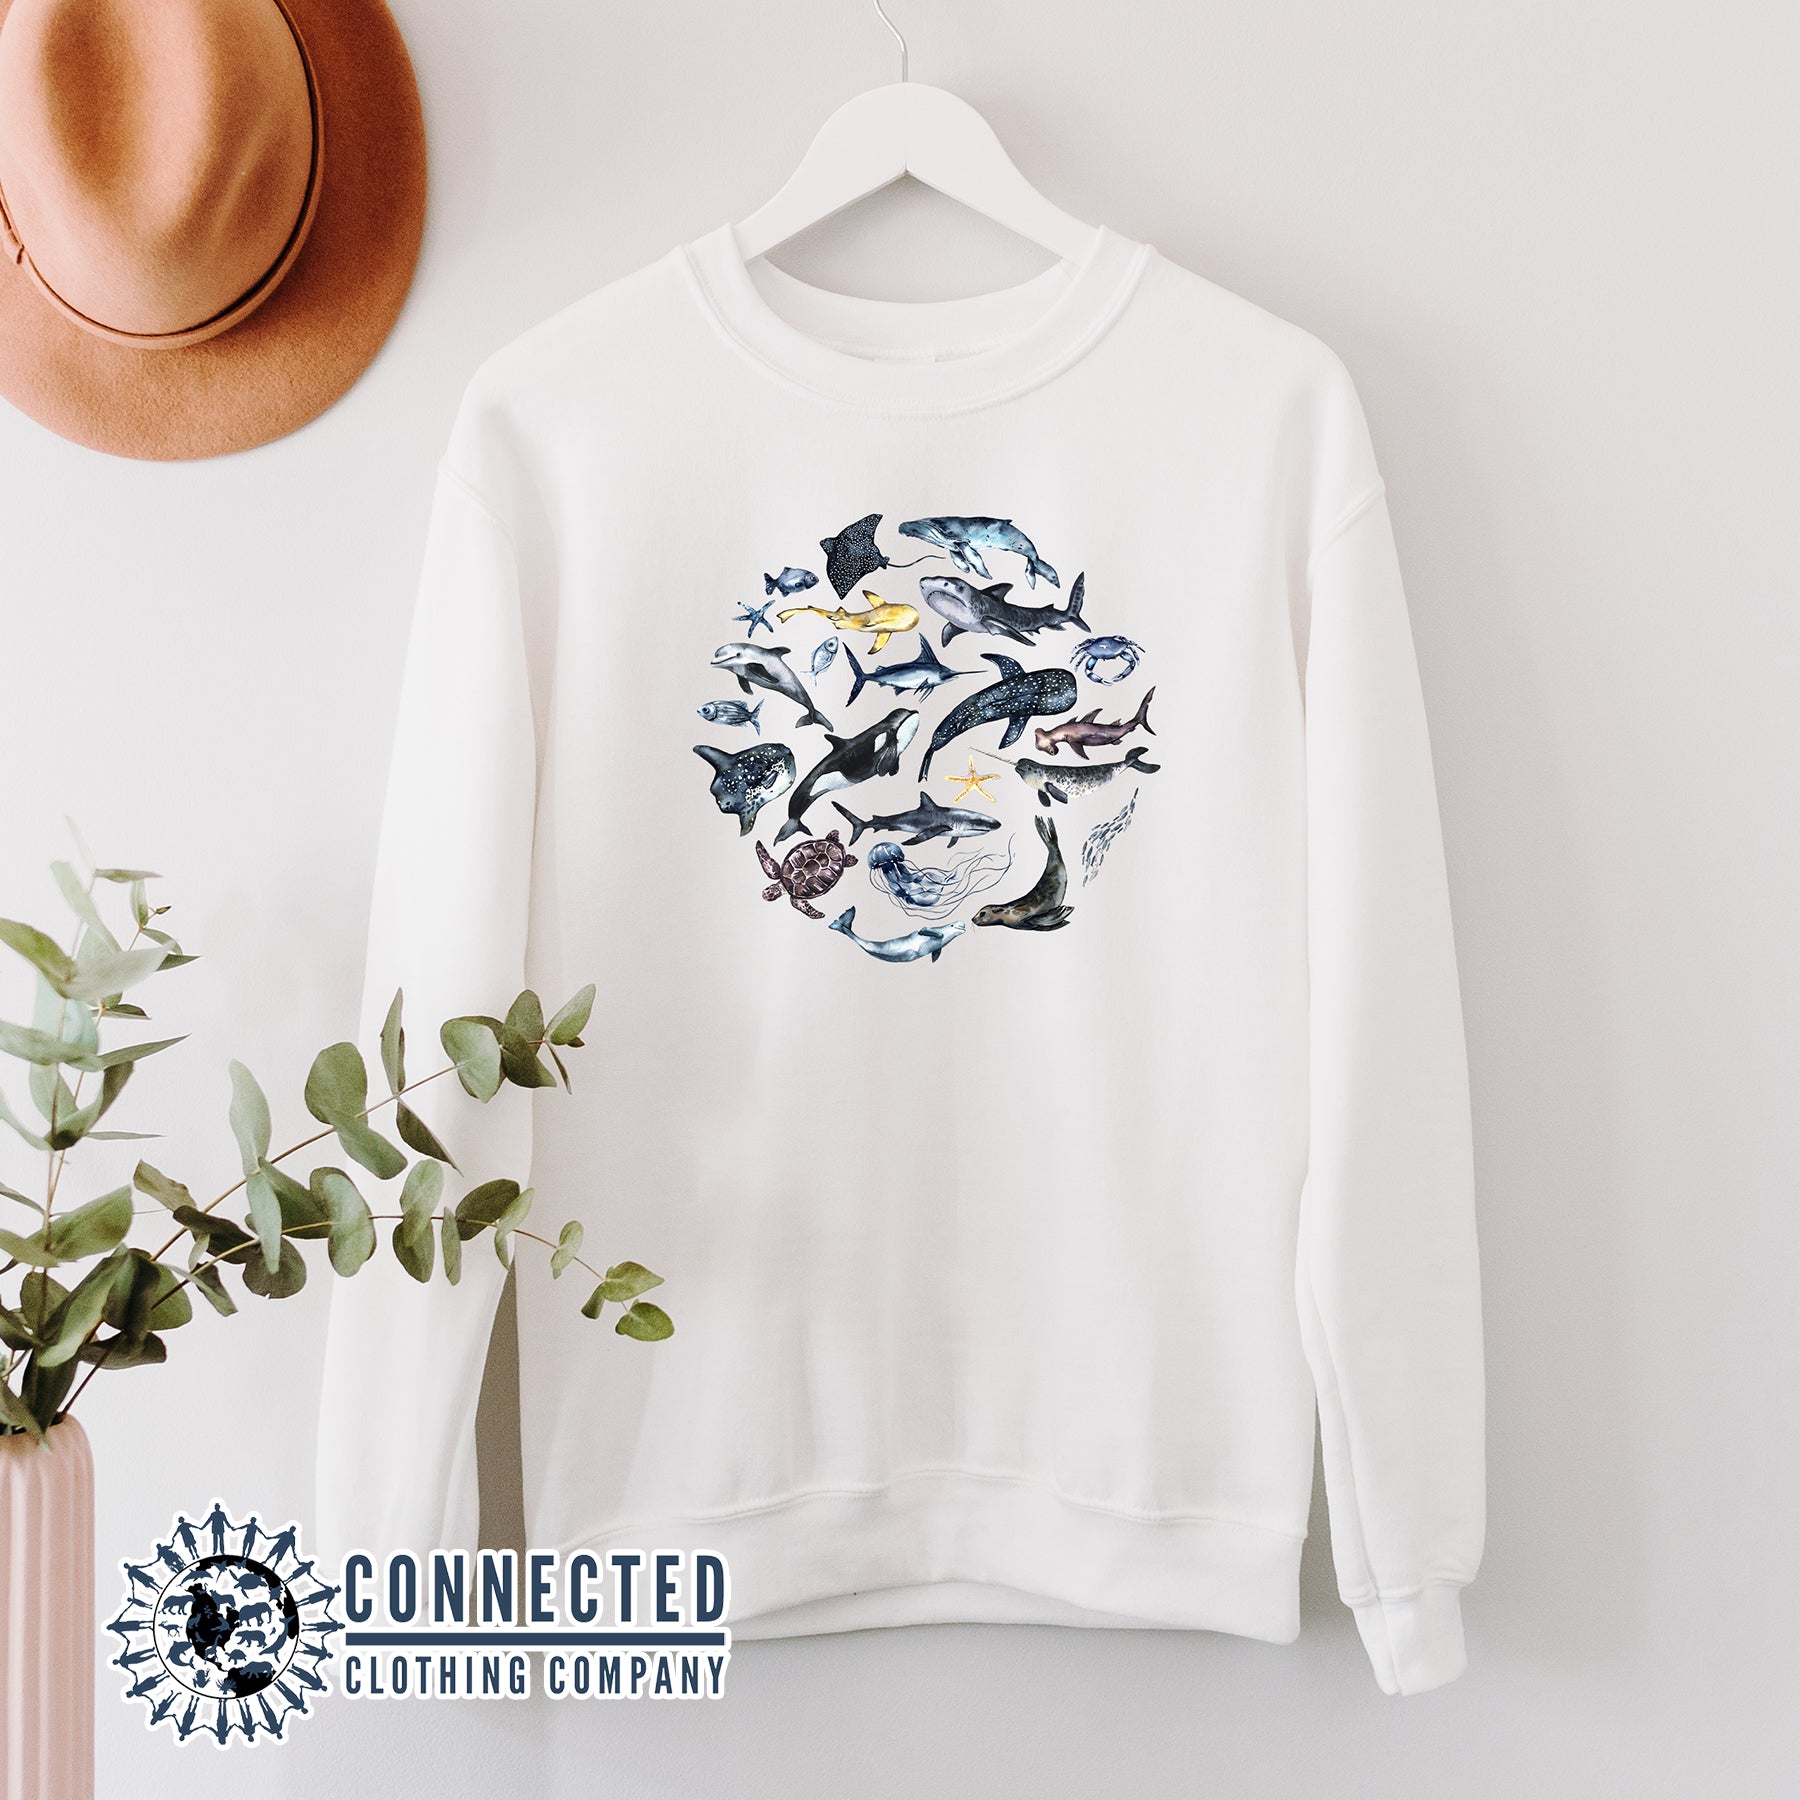 Blue Ocean Sea Creatures Sweatshirt - Connected Clothing Company - 10% of proceeds donated to ocean conservation